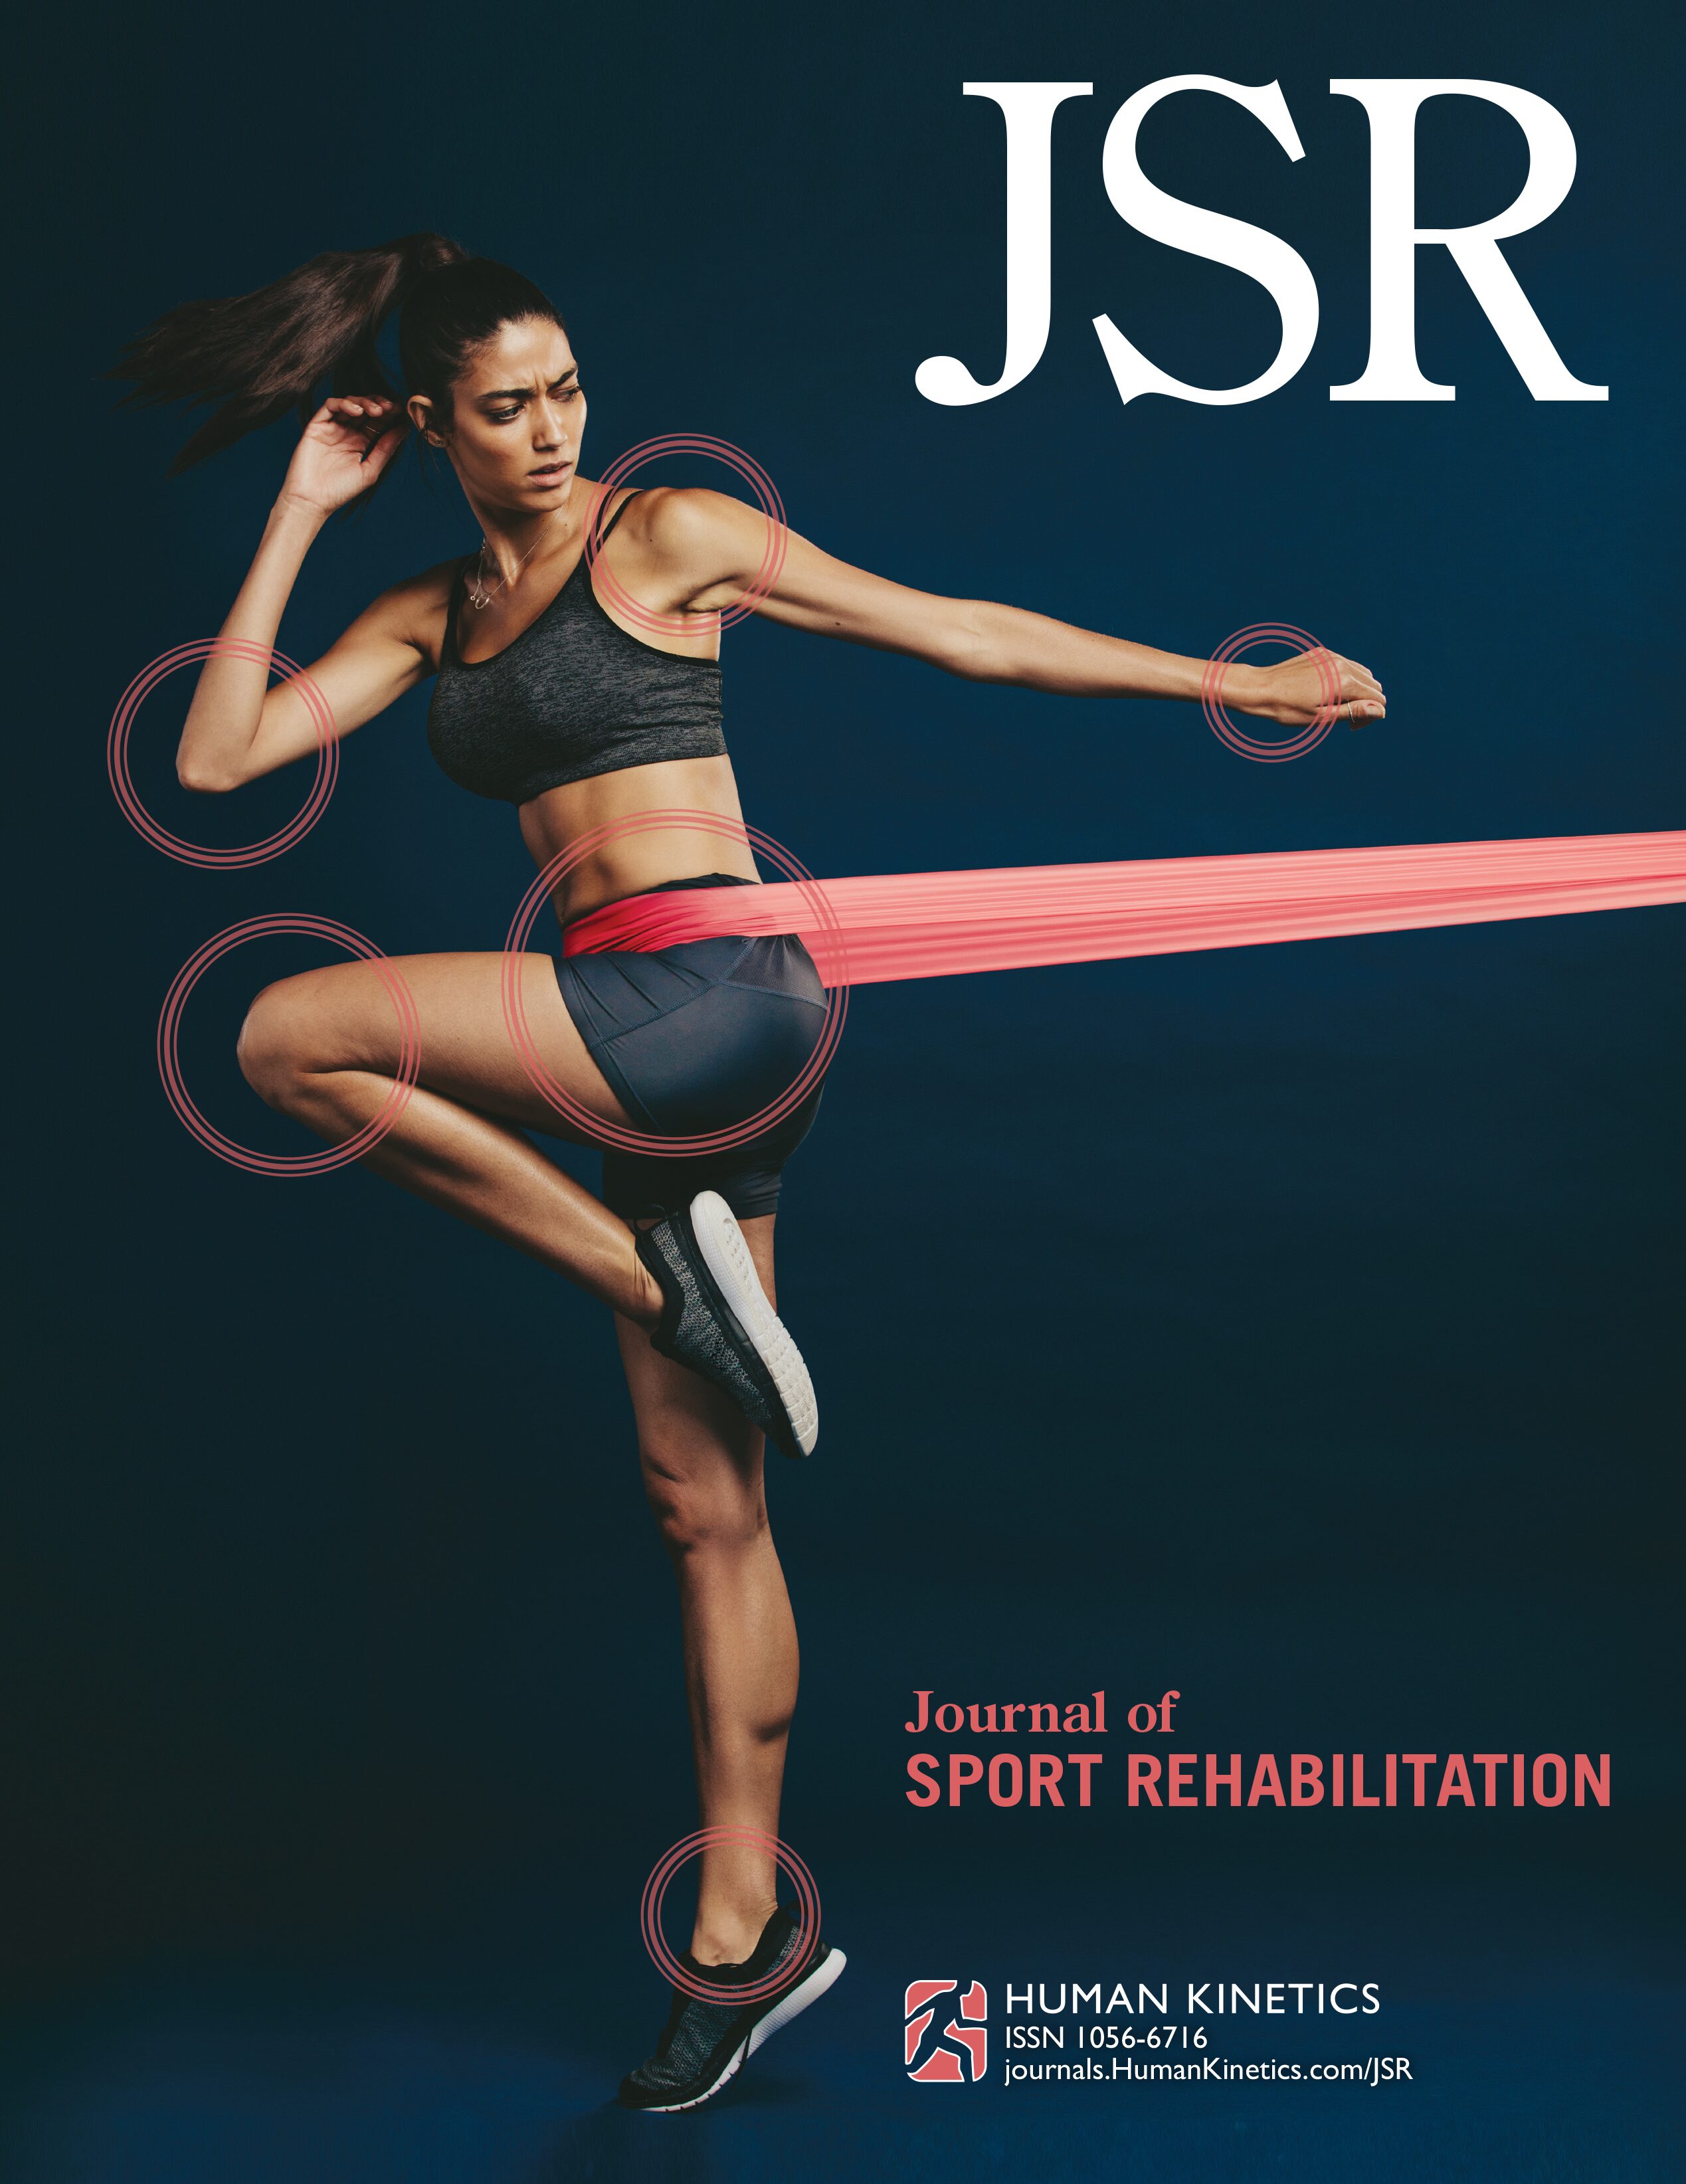 The Effects of 2 Different Soft Tissue Mobilization Techniques on Delayed Onset Muscle Soreness in Male Recreational Athletes: A Single-Blinded Randomized Controlled Trial